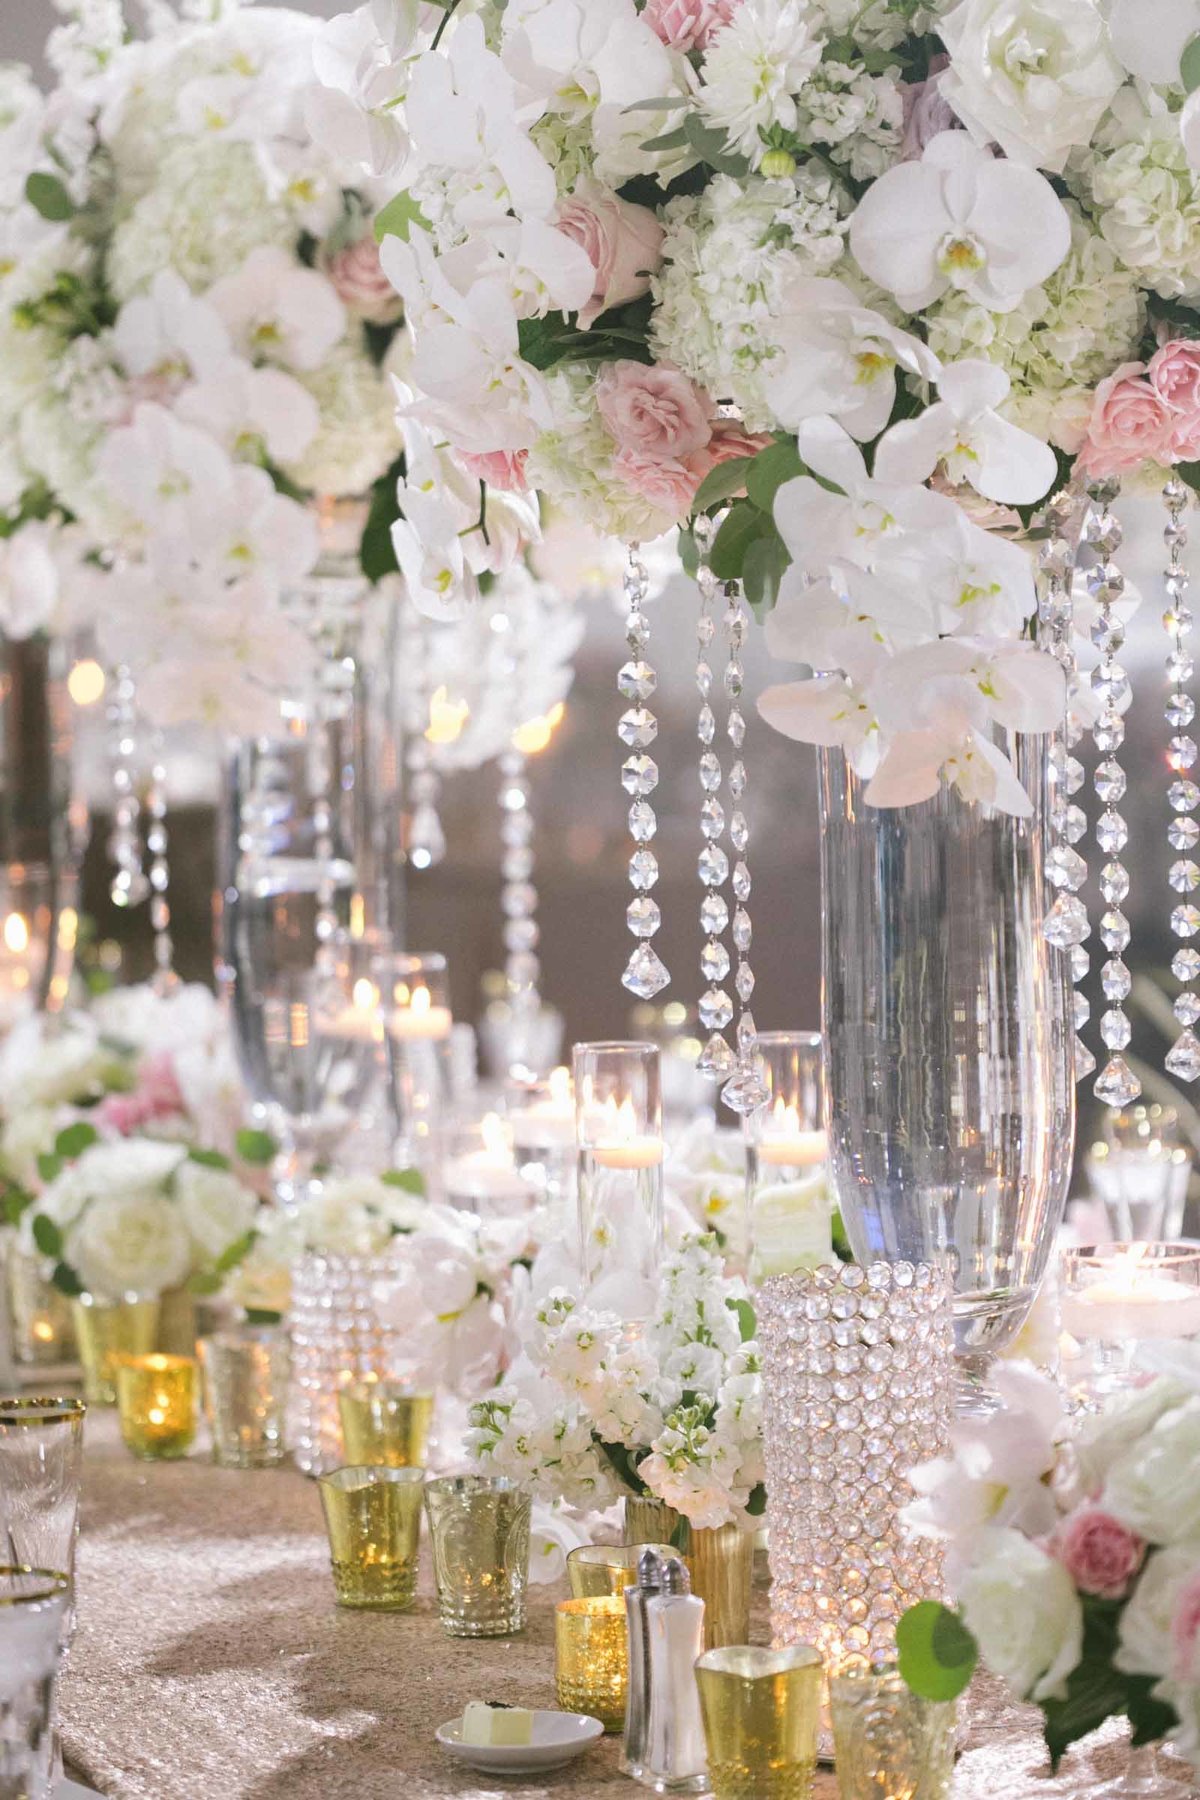 Stunning wedding reception table, tall arrangements with phalaenopsis orchids and crystal strands.